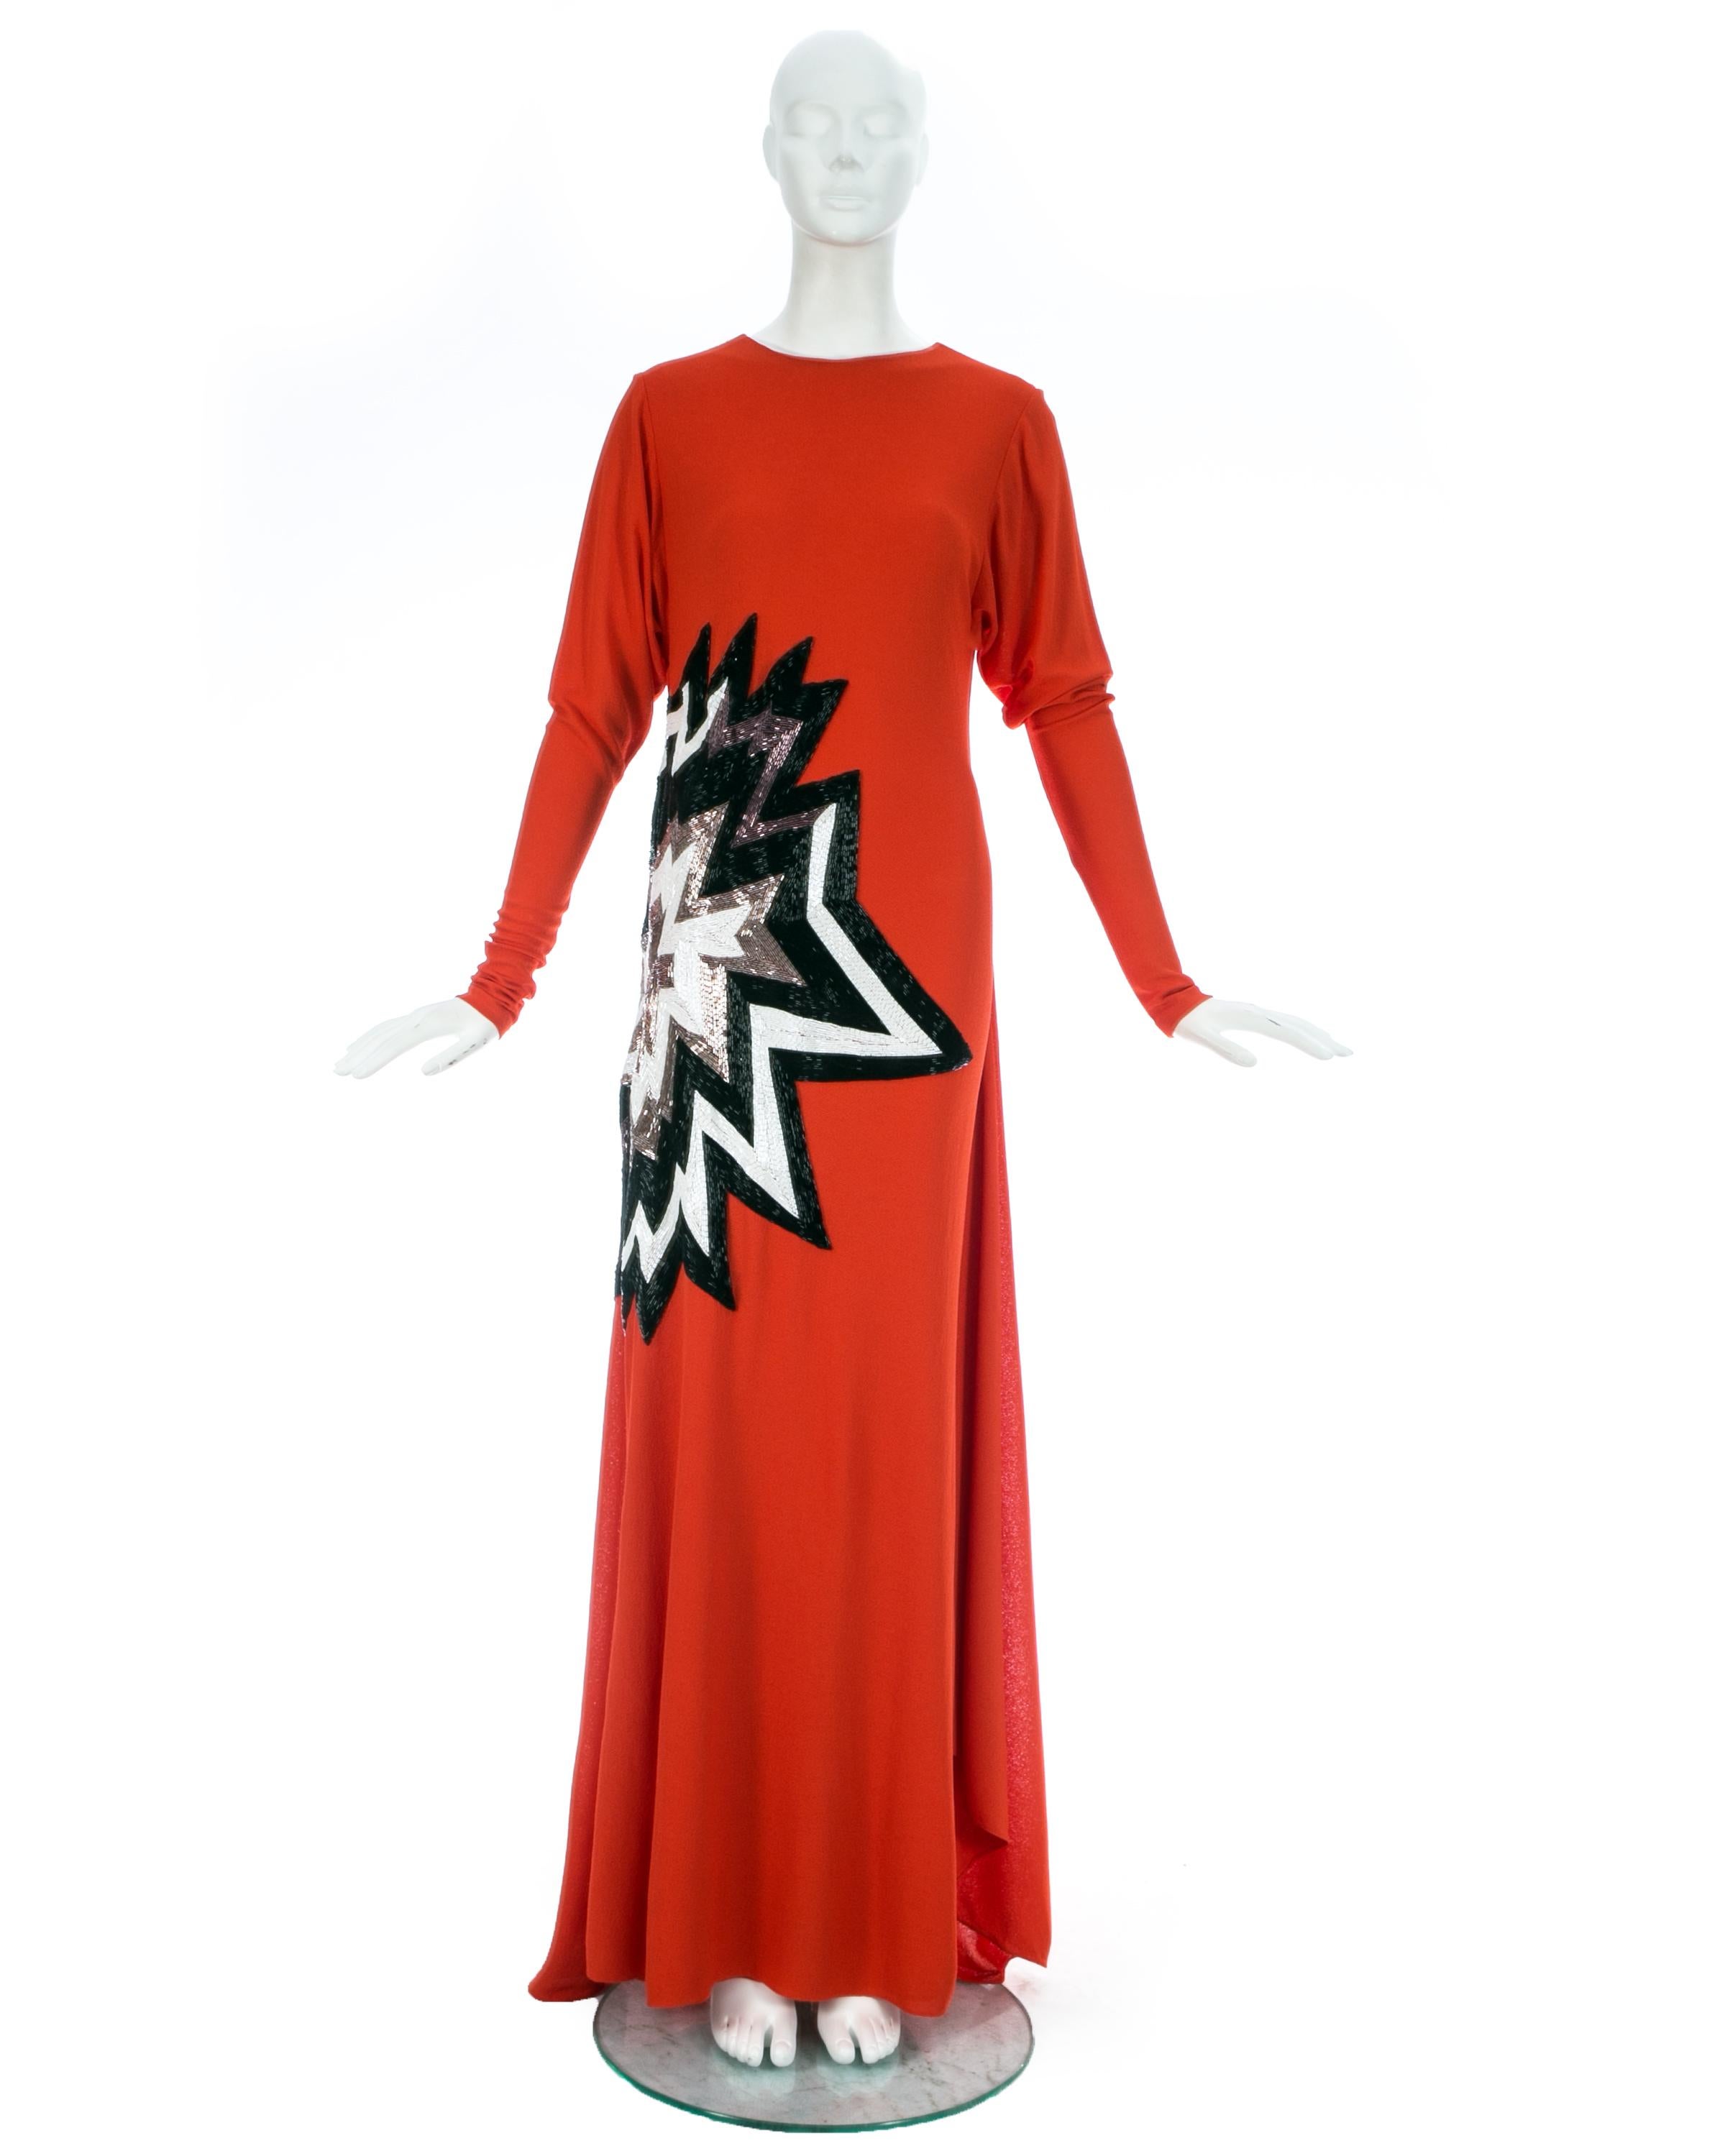 Tom Ford coral viscose crepe beaded evening dress with train, fw 2013 In Good Condition For Sale In London, London